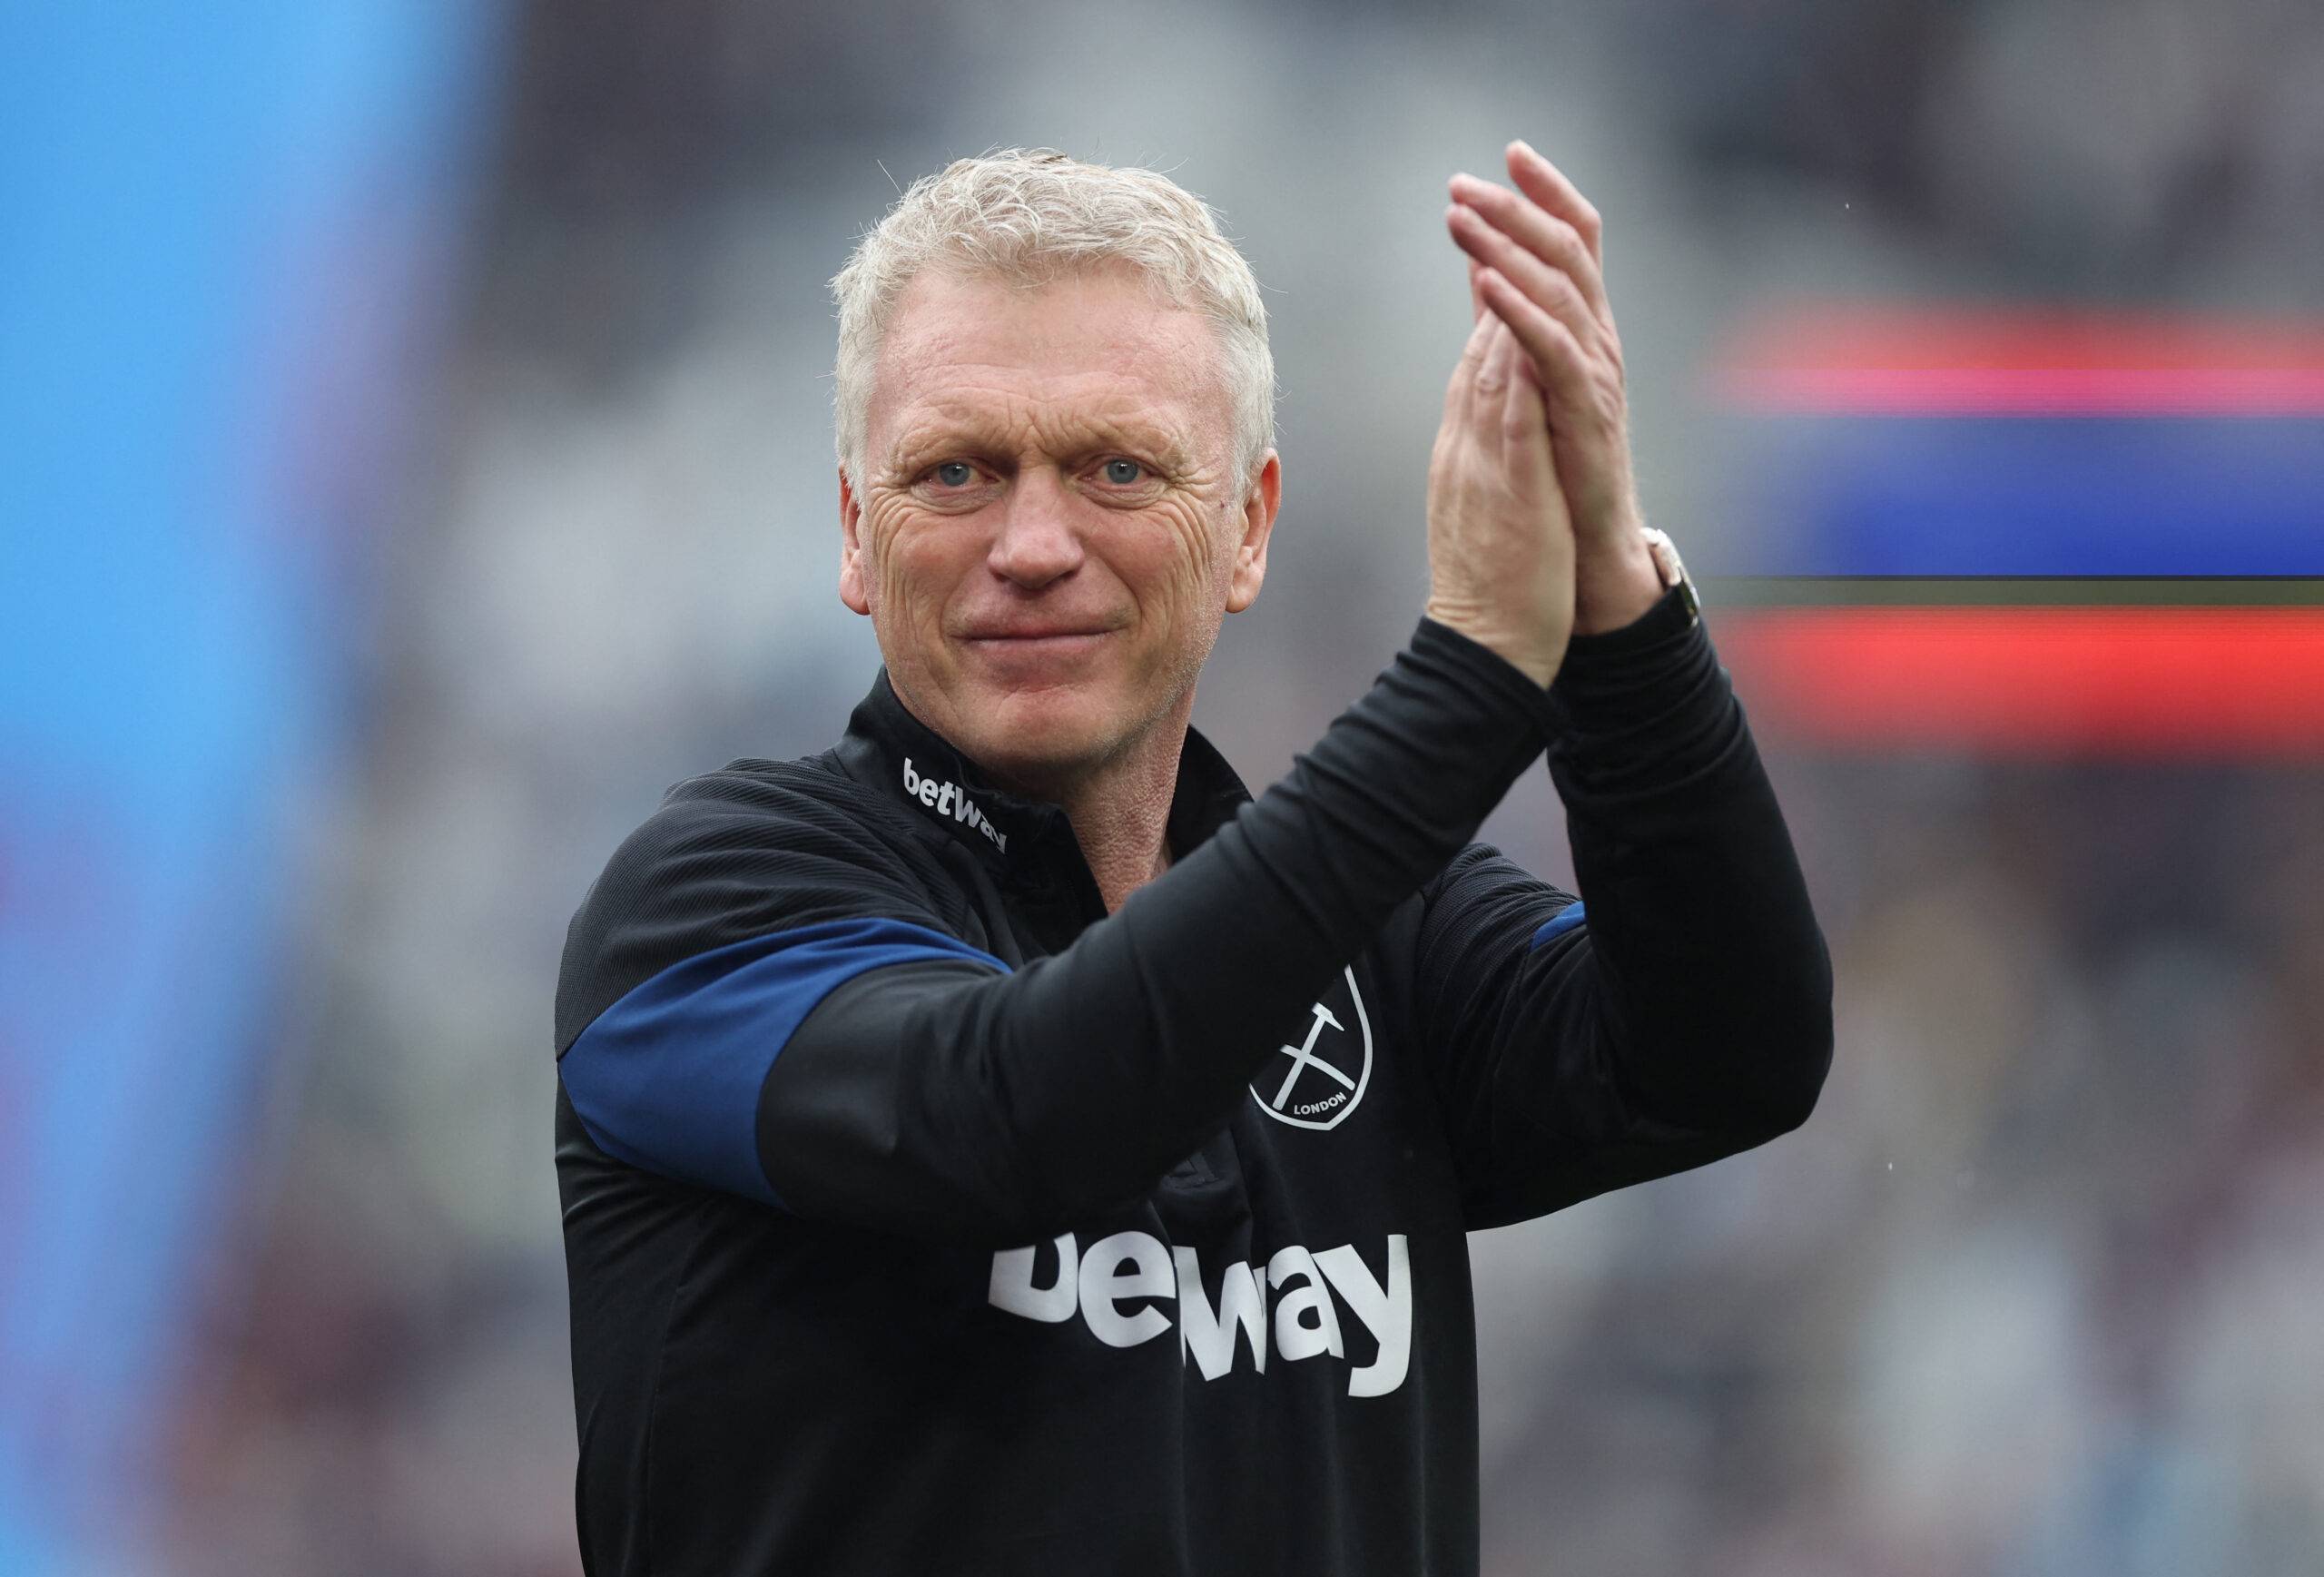 West Ham manager David Moyes smiling and clapping